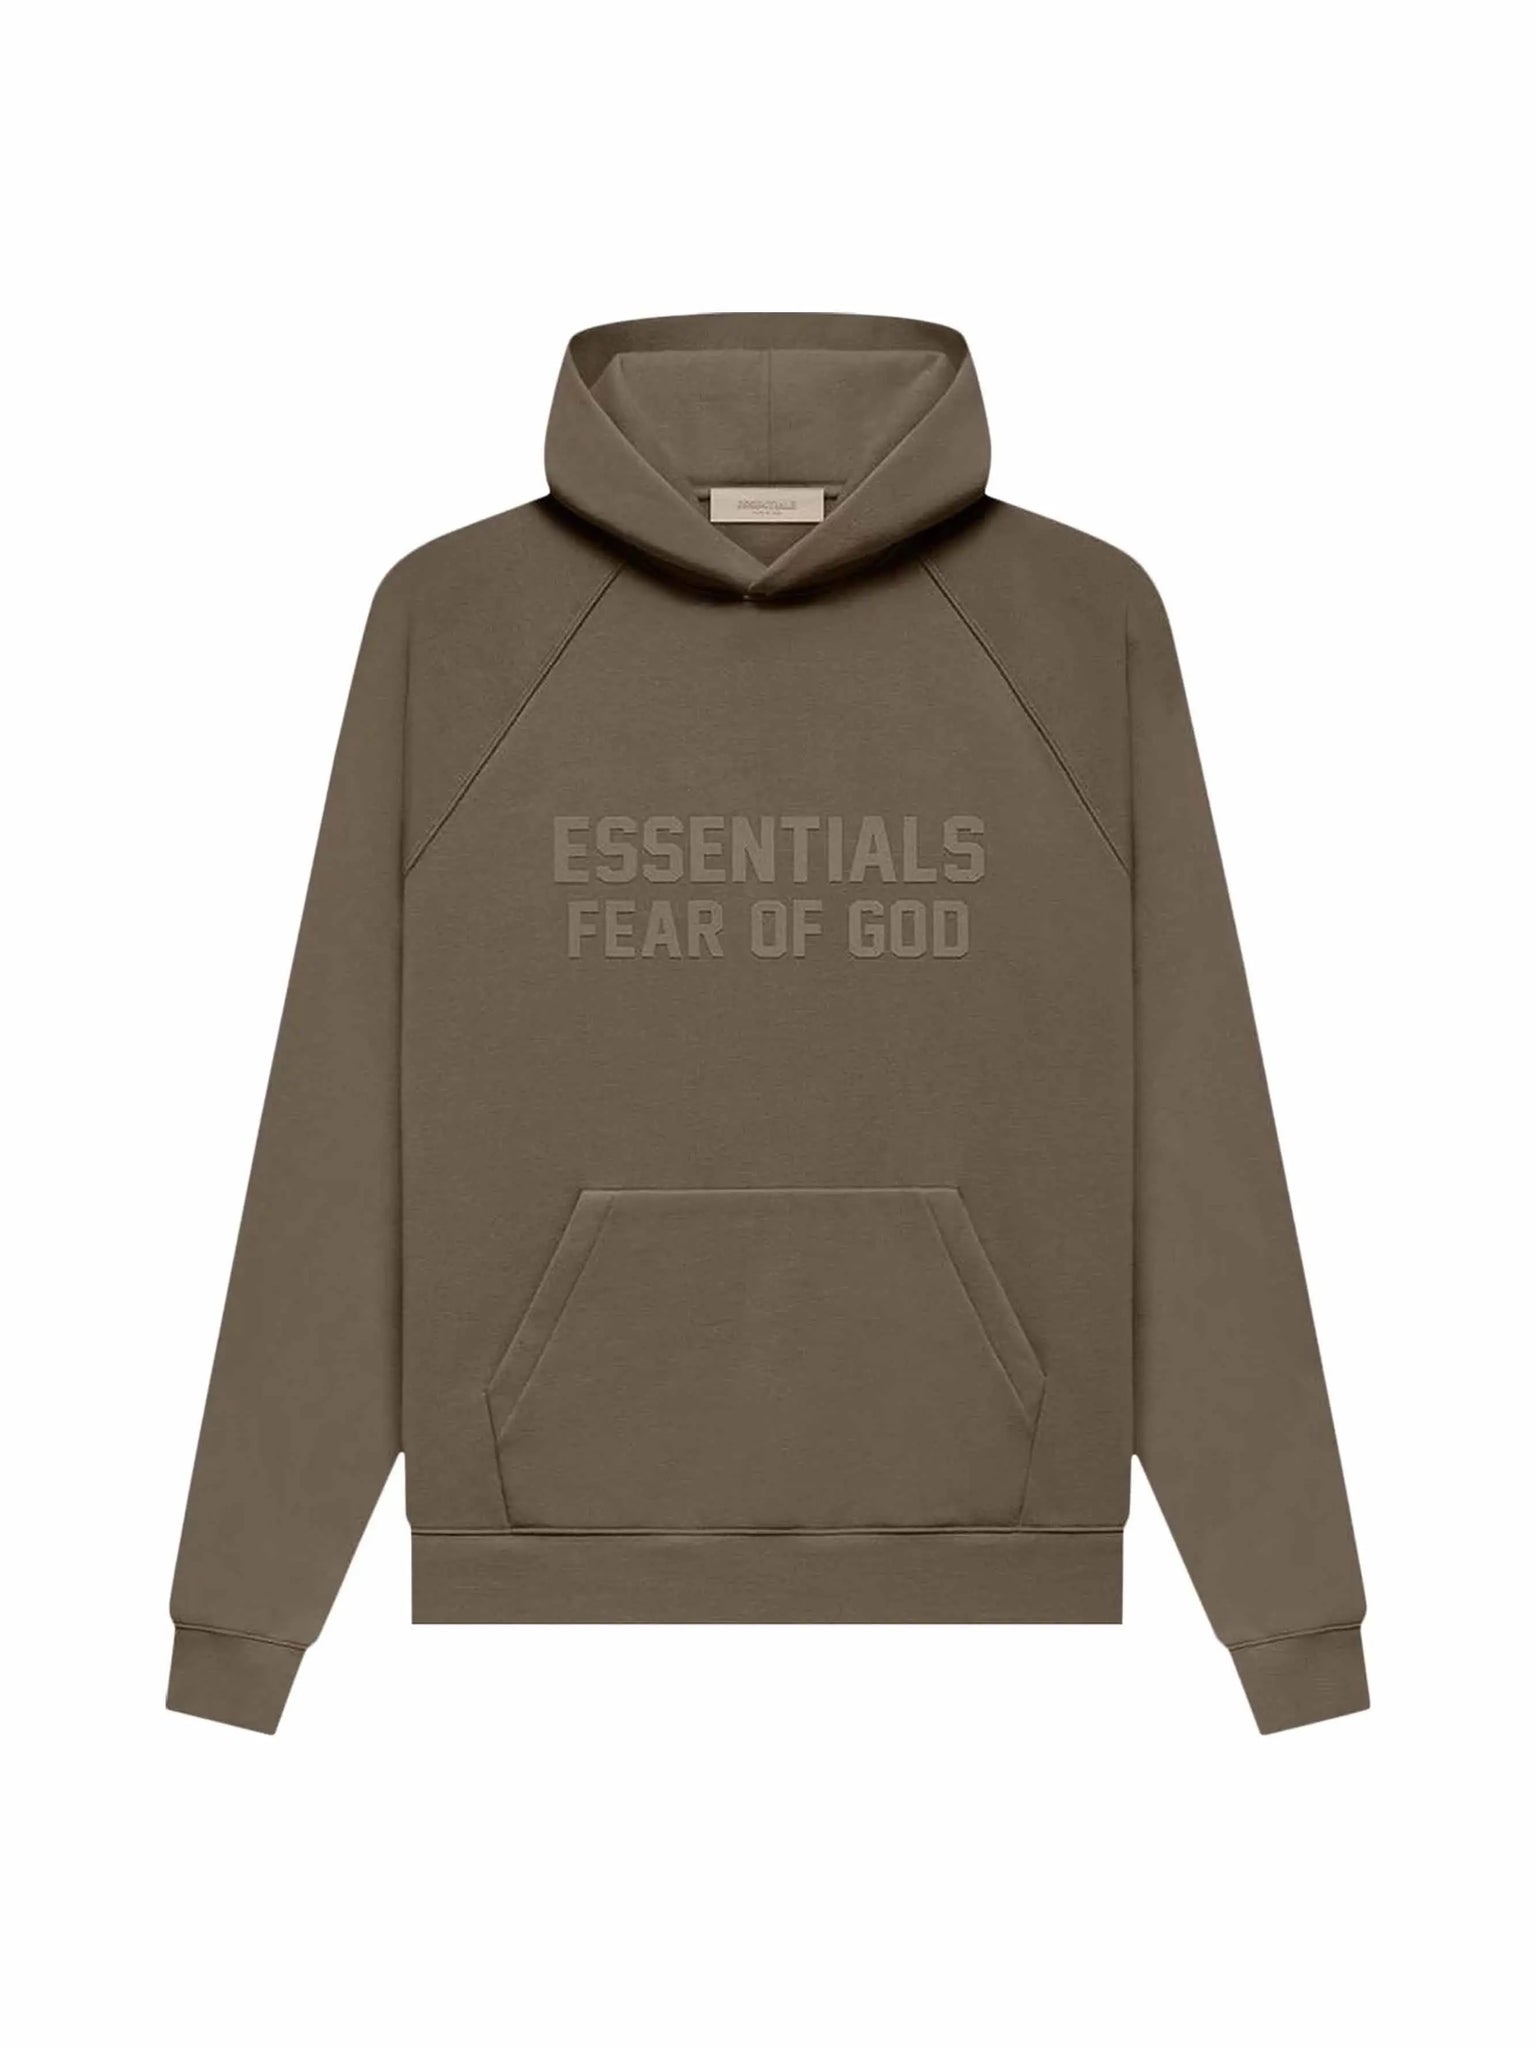 Fear of God Essentials Hoodie Wood in Auckland, New Zealand - Shop name